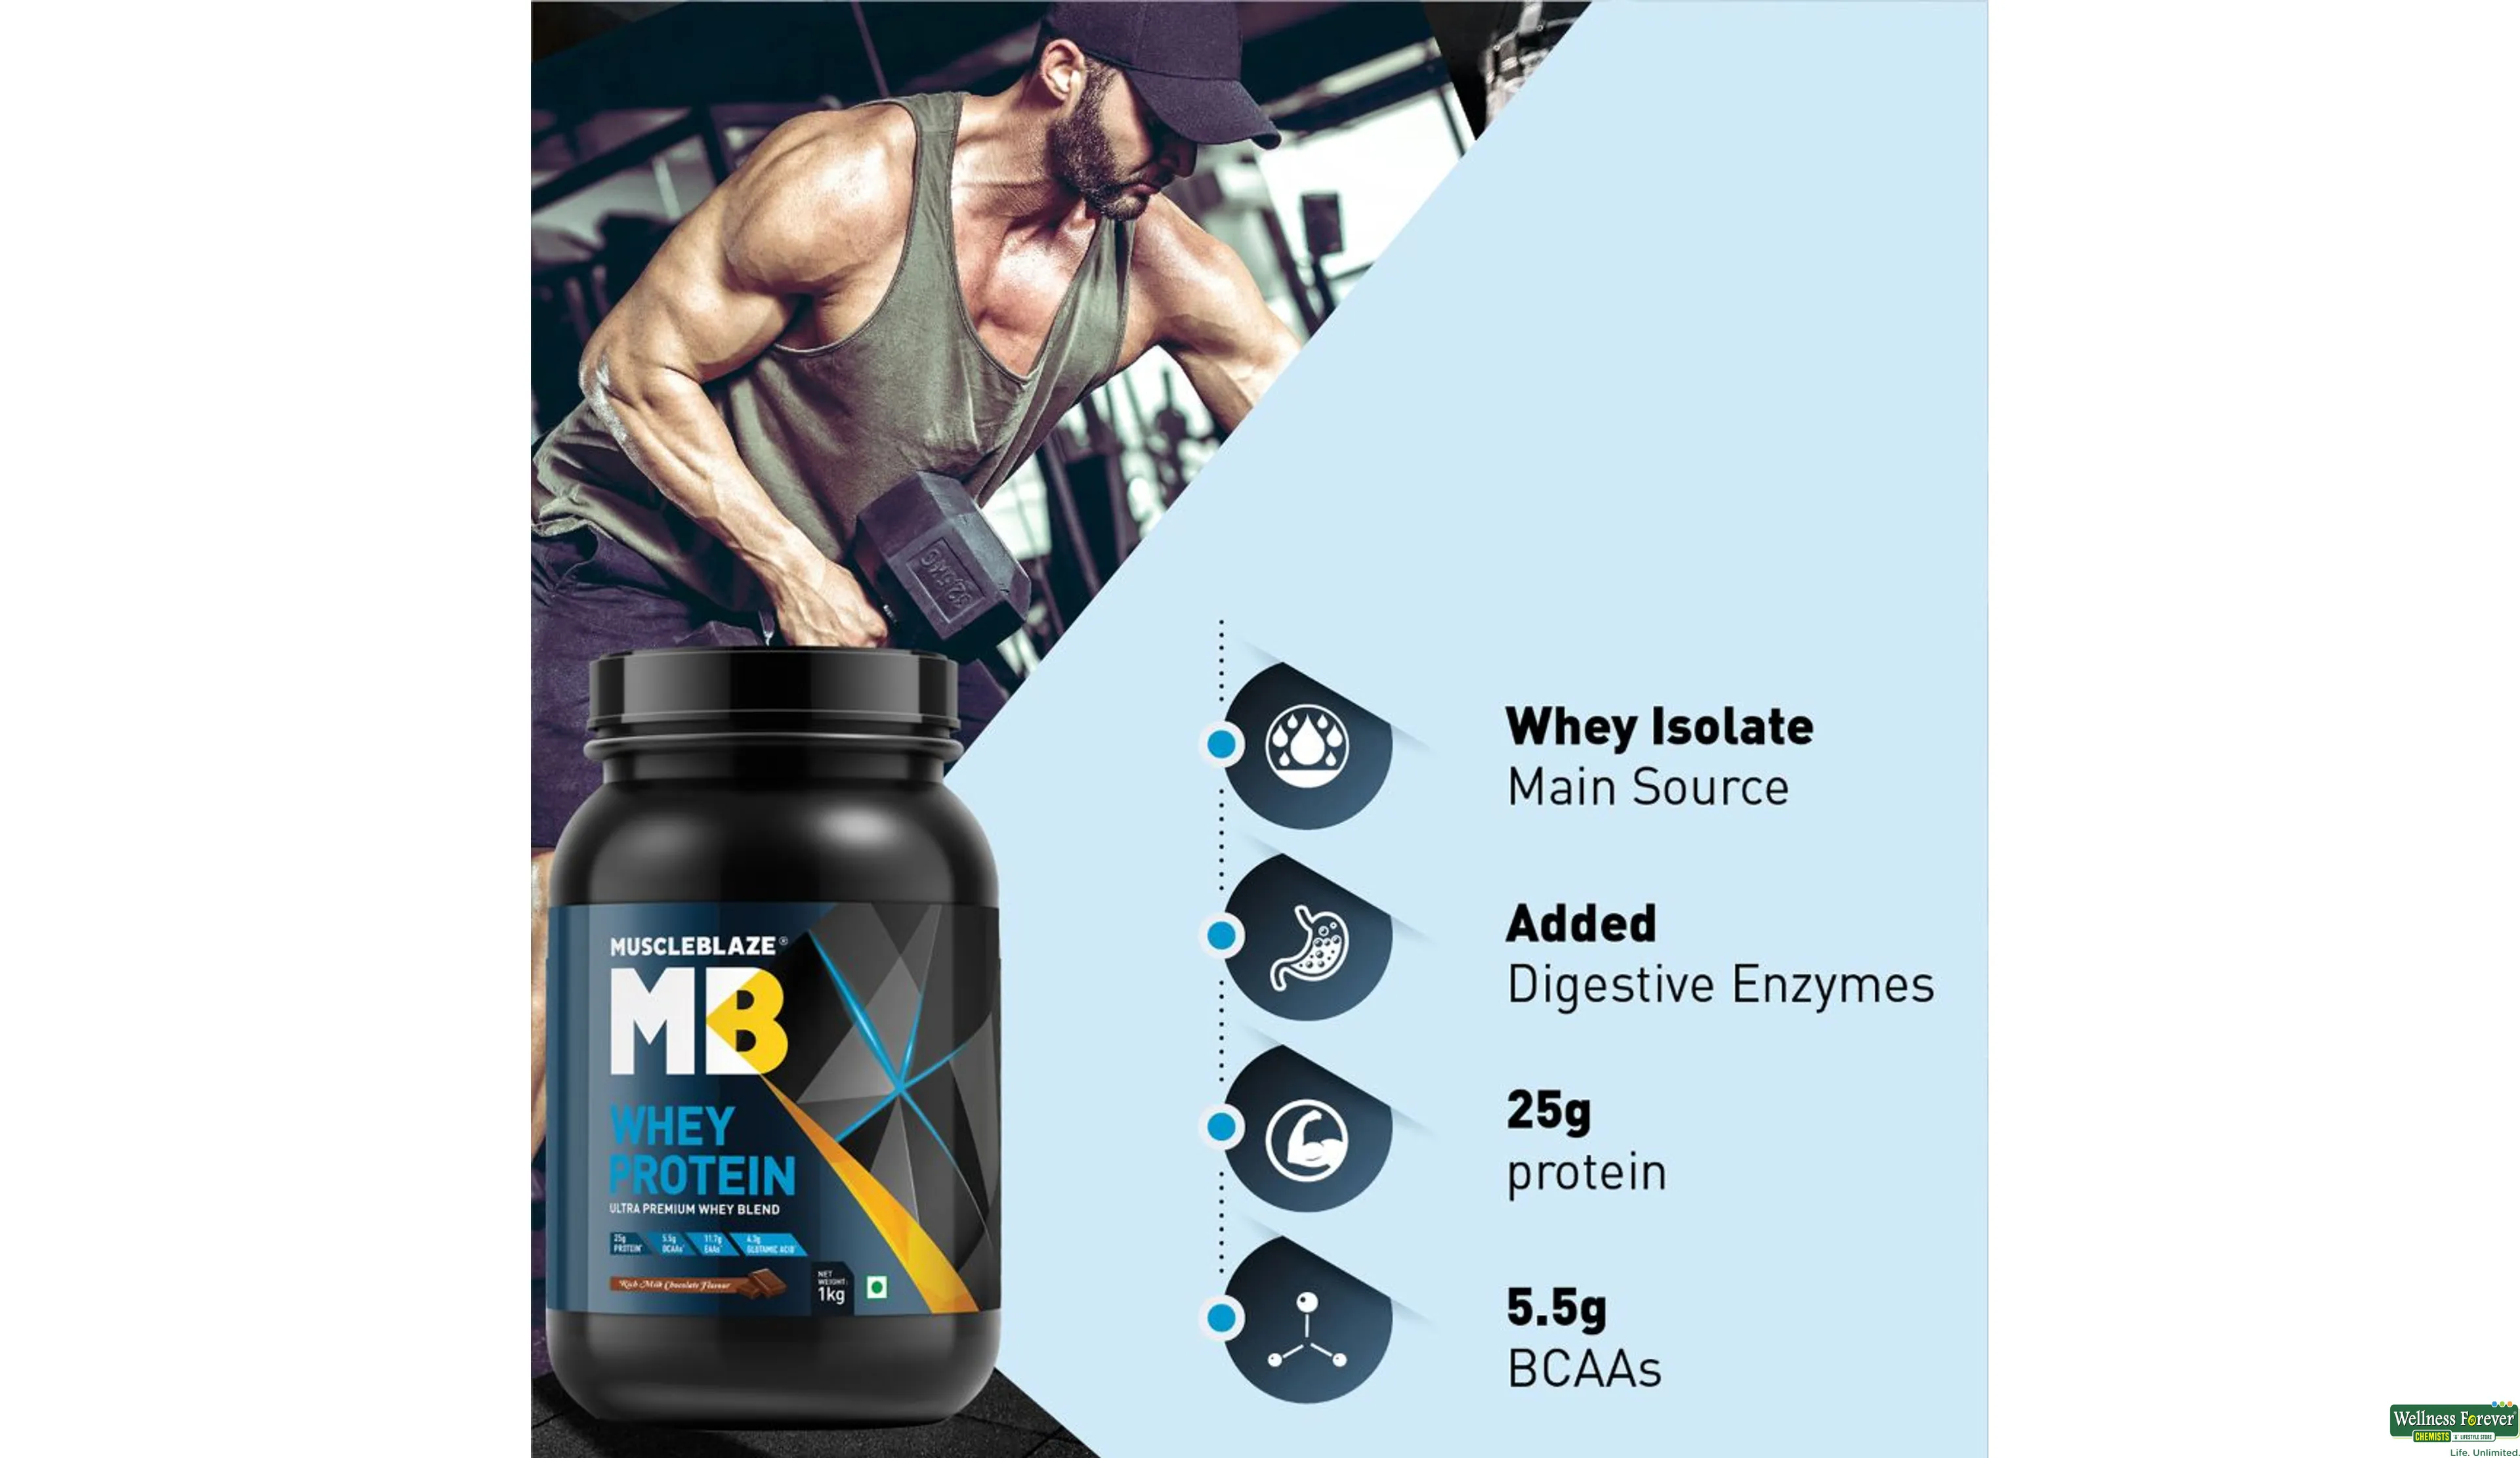 MB PWDR WHEY PROTEIN CHOC 1KG- 7, 1KG, 